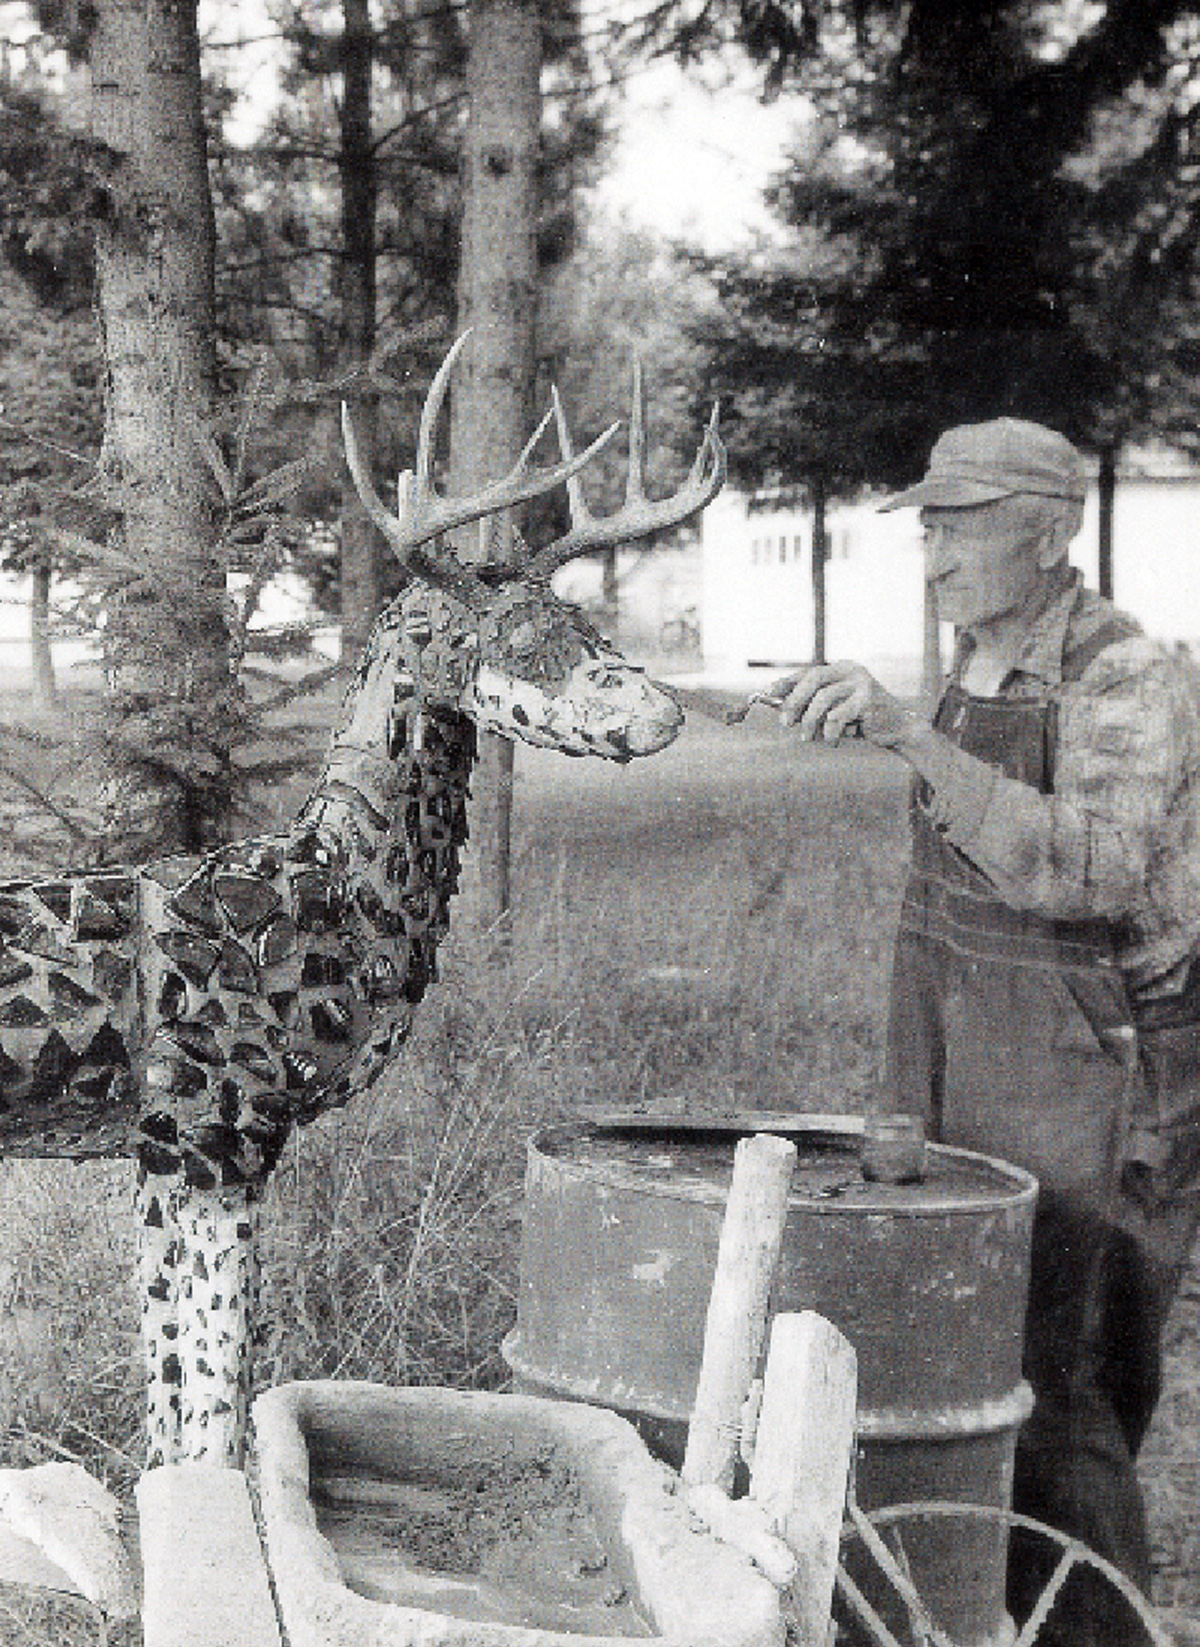 A photograph of Fred Smith, creator of the fantastical Wisconsin Concrete Park, circa nineteen sixty.